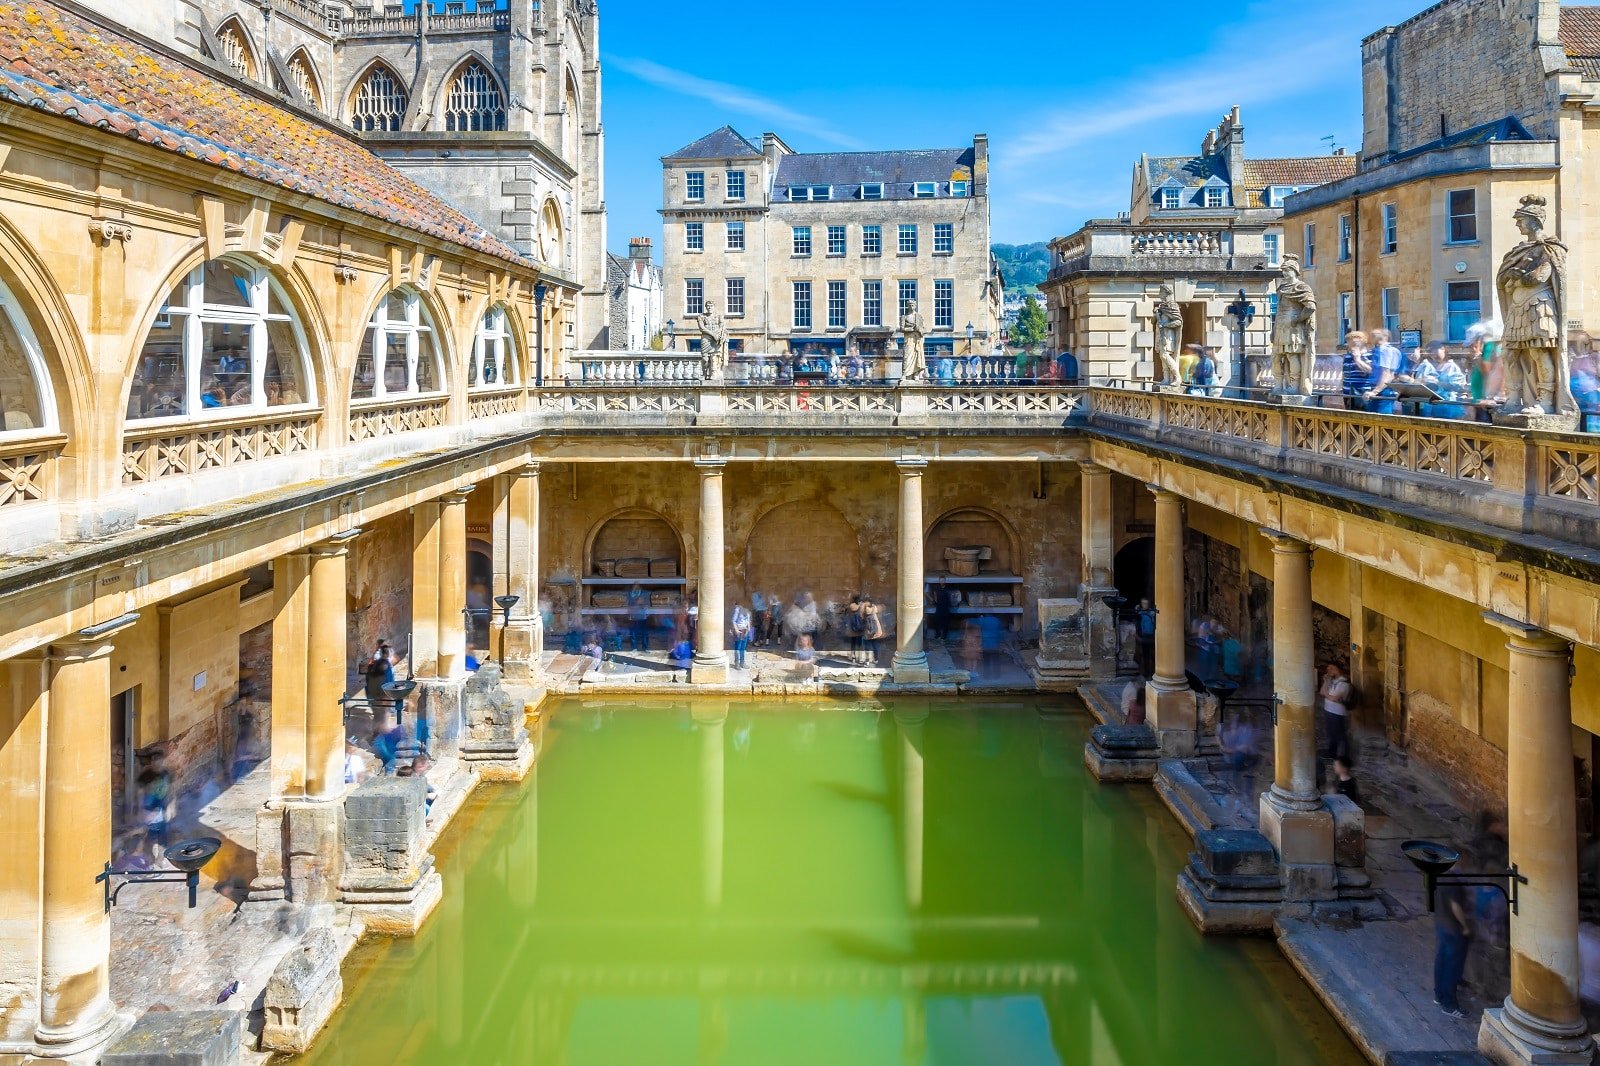 <p><span>If you want to experience the original spa culture of Europe, you can’t miss the Roman Baths in Bath, England. This is one of the best-preserved Roman remains in the world and one of the most visited attractions in the UK. Here, you can see the ancient ruins of the temple and the baths, where the Romans worshiped the goddess Sulis Minerva and enjoyed the hot mineral springs. You can also visit the museum to learn more about the site’s history and artifacts.</span></p> <p><b>Insider’s Tip: </b><span>Visit the Thermae Bath Spa’s rooftop pool at dusk for a magical experience as the city lights up.</span></p> <p><b>When To Travel: </b><span>Enjoy mild spring or early autumn weather to avoid the peak tourist season.</span></p> <p><b>How To Get There: </b><span>Bath is easily accessible by train from London, with a journey time of around 1.5 hours.</span></p>